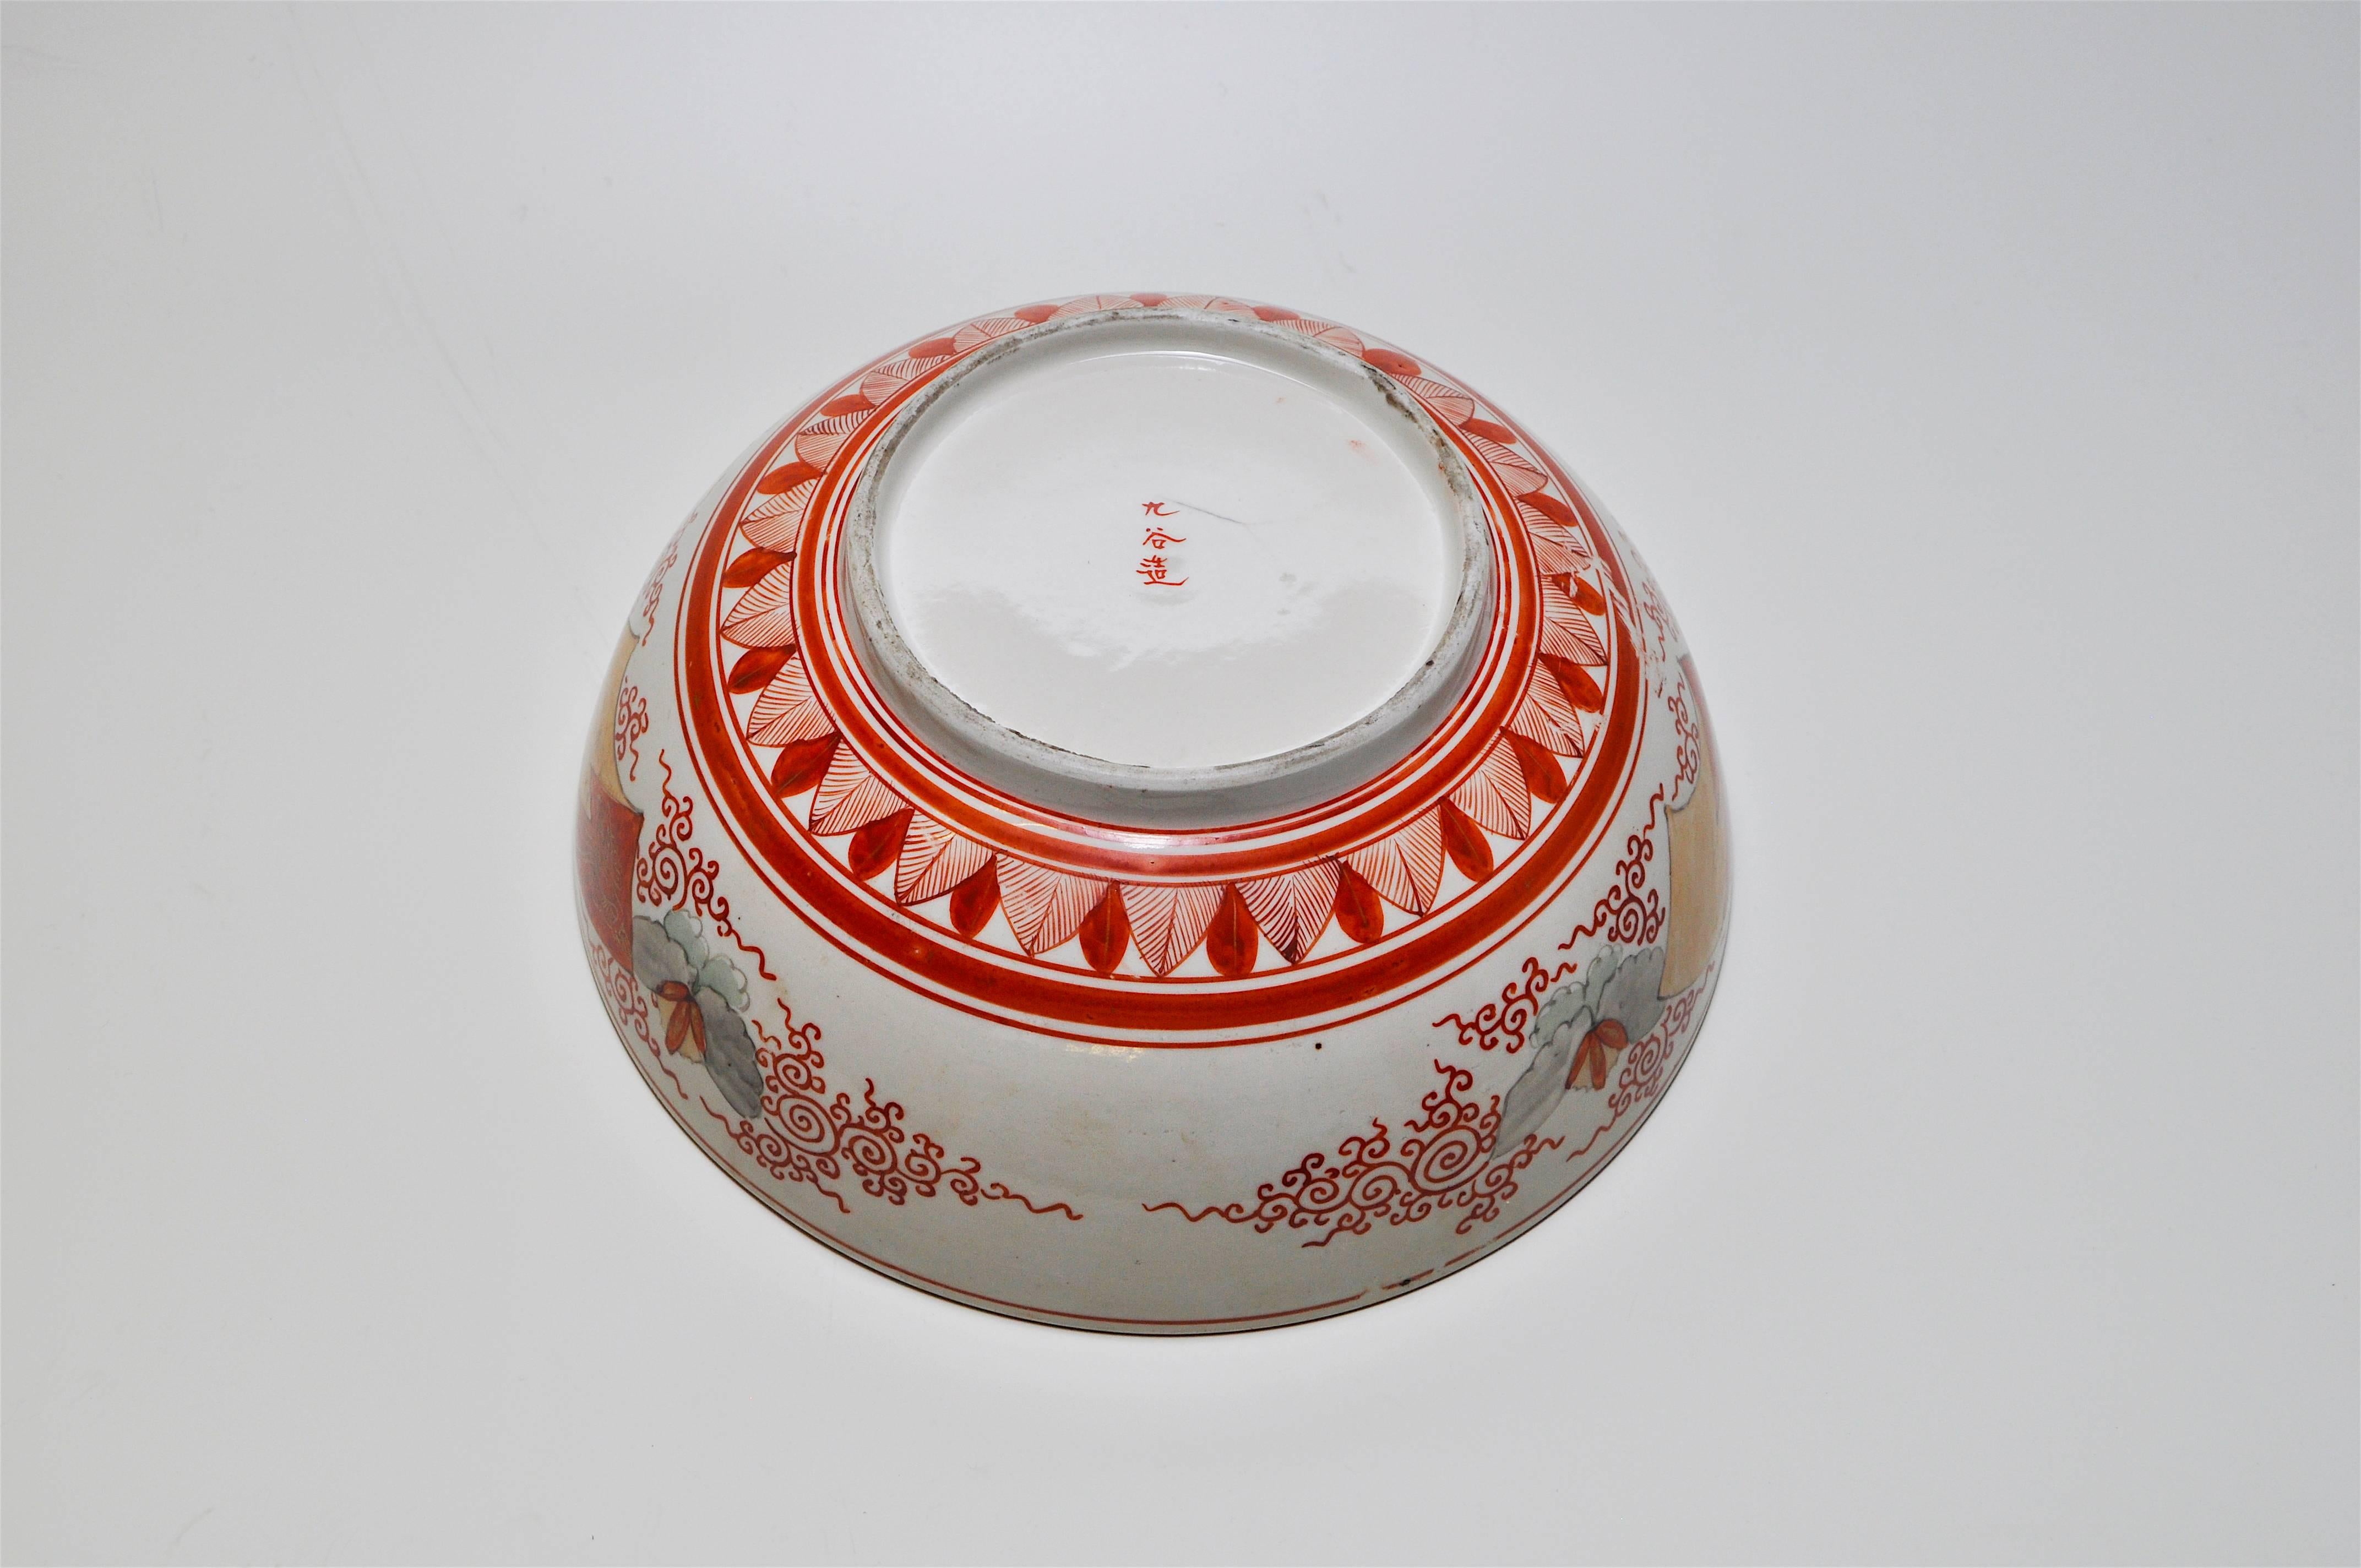 A stunning decorative Japanese bowl in rich autumnal colours of red, orange, rust, black and highlighted in gold. The highly detailed and stylised pattern centralises on a pictorial oriental themed scene most likely from Japanese fables in the base.